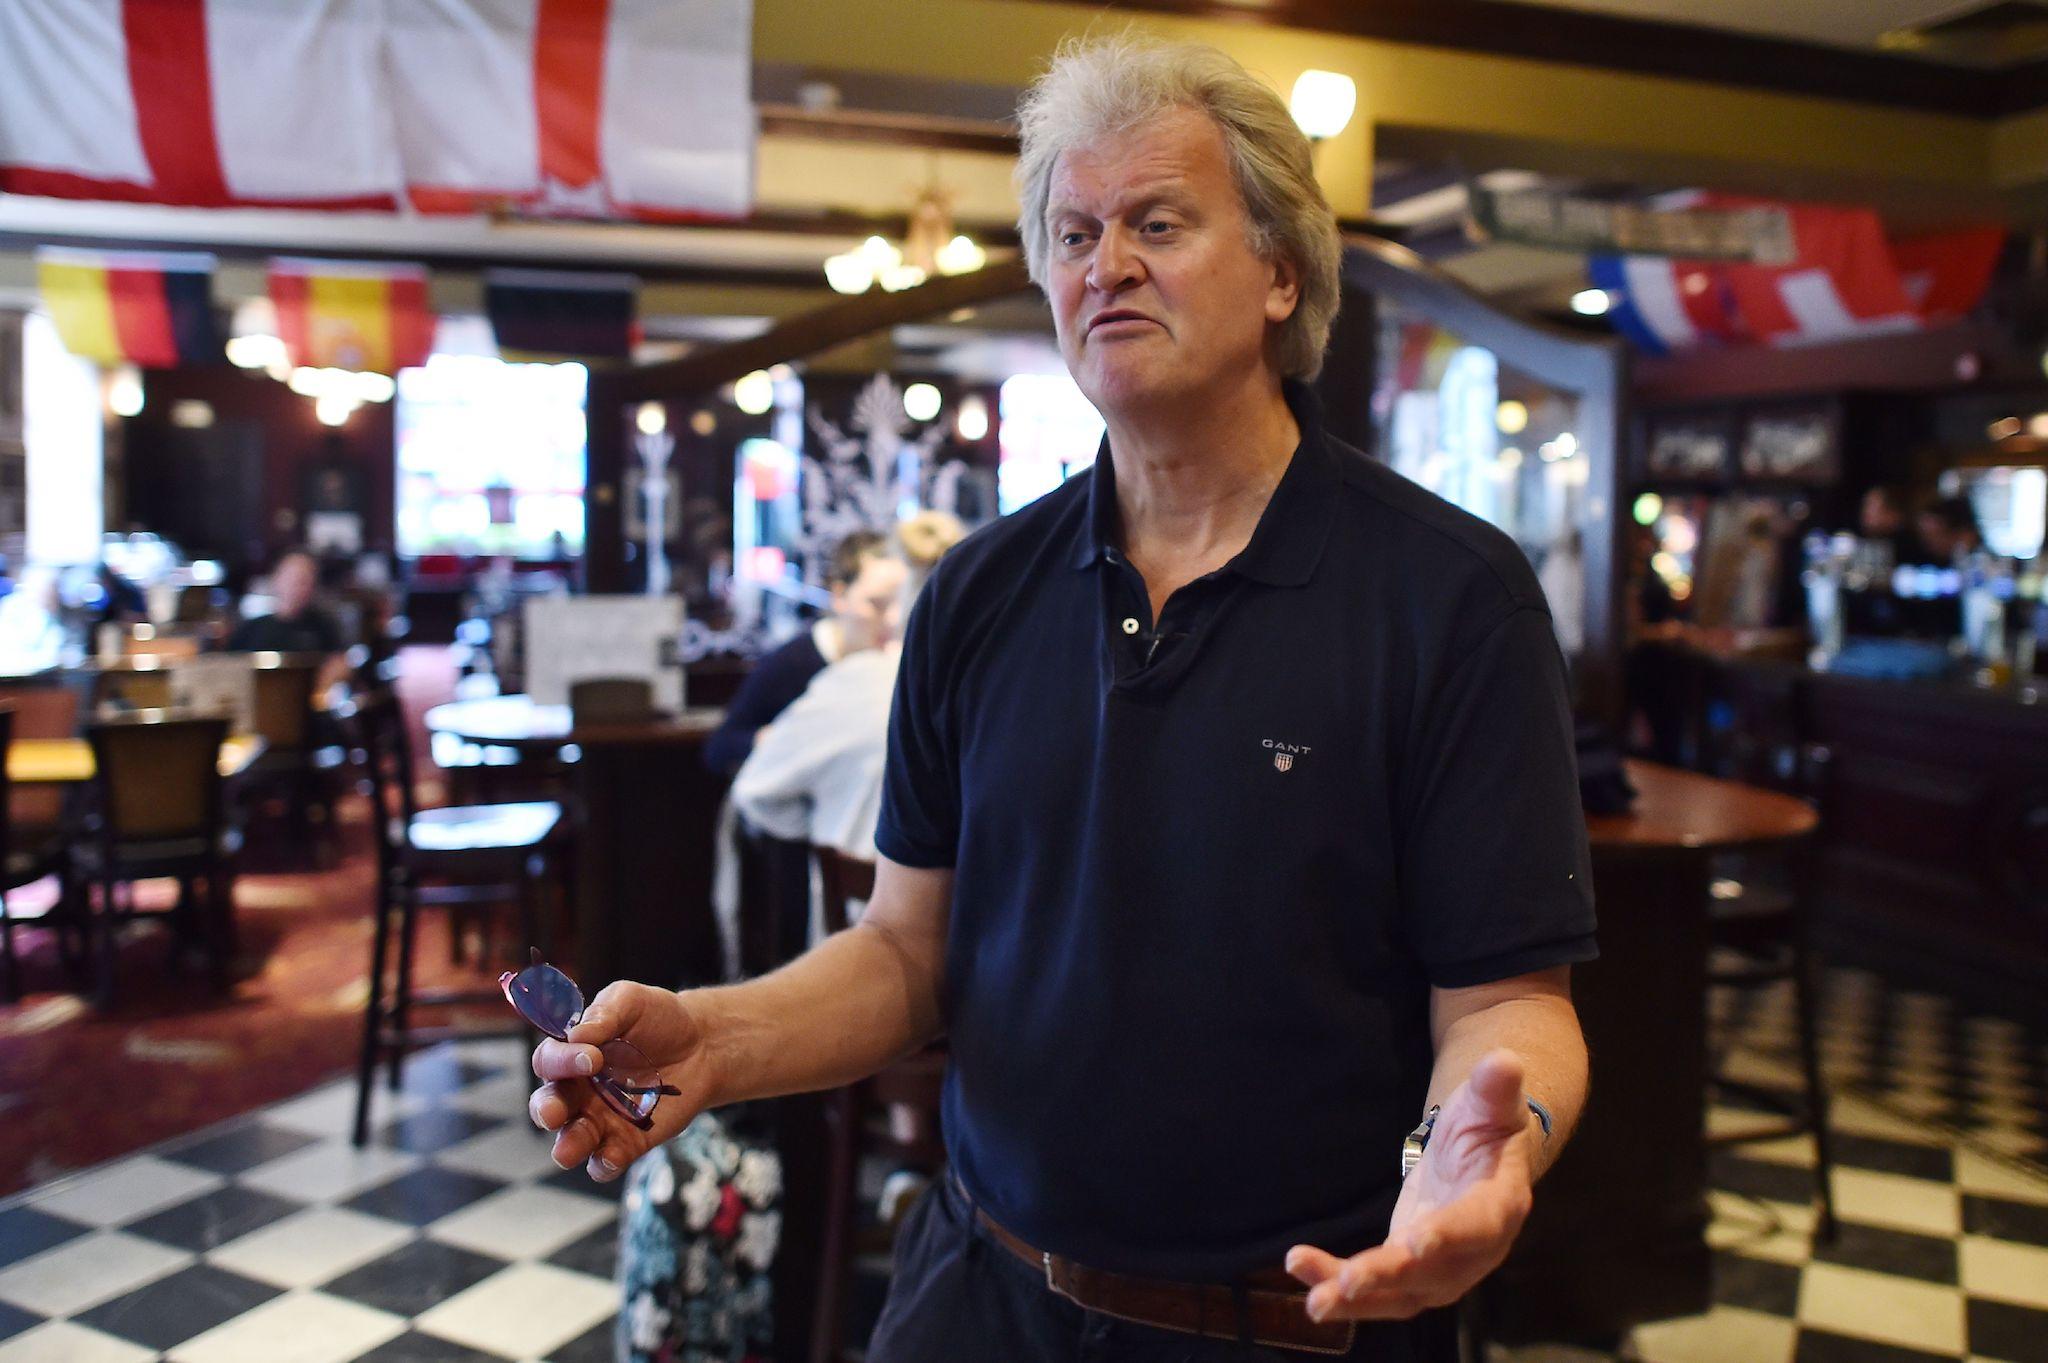 Wetherspoon boss Tim Martin attacks Remainers after pub chain's profits plummet